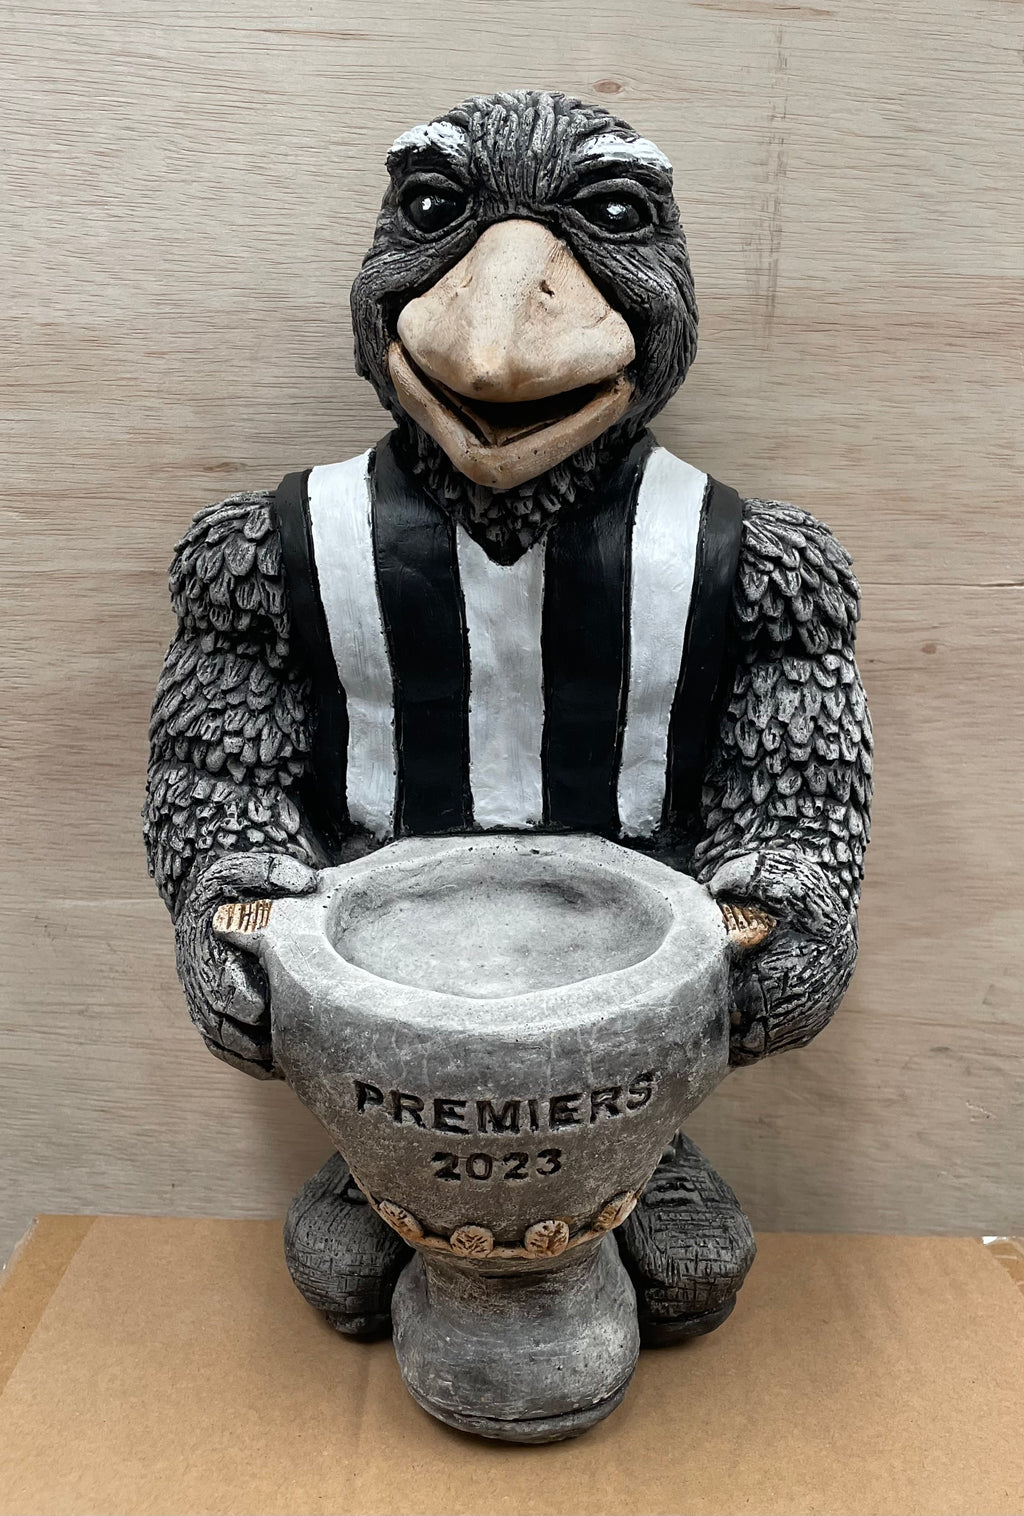 Magpie Premiers 2023 cup concrete - PICK UP ONLY